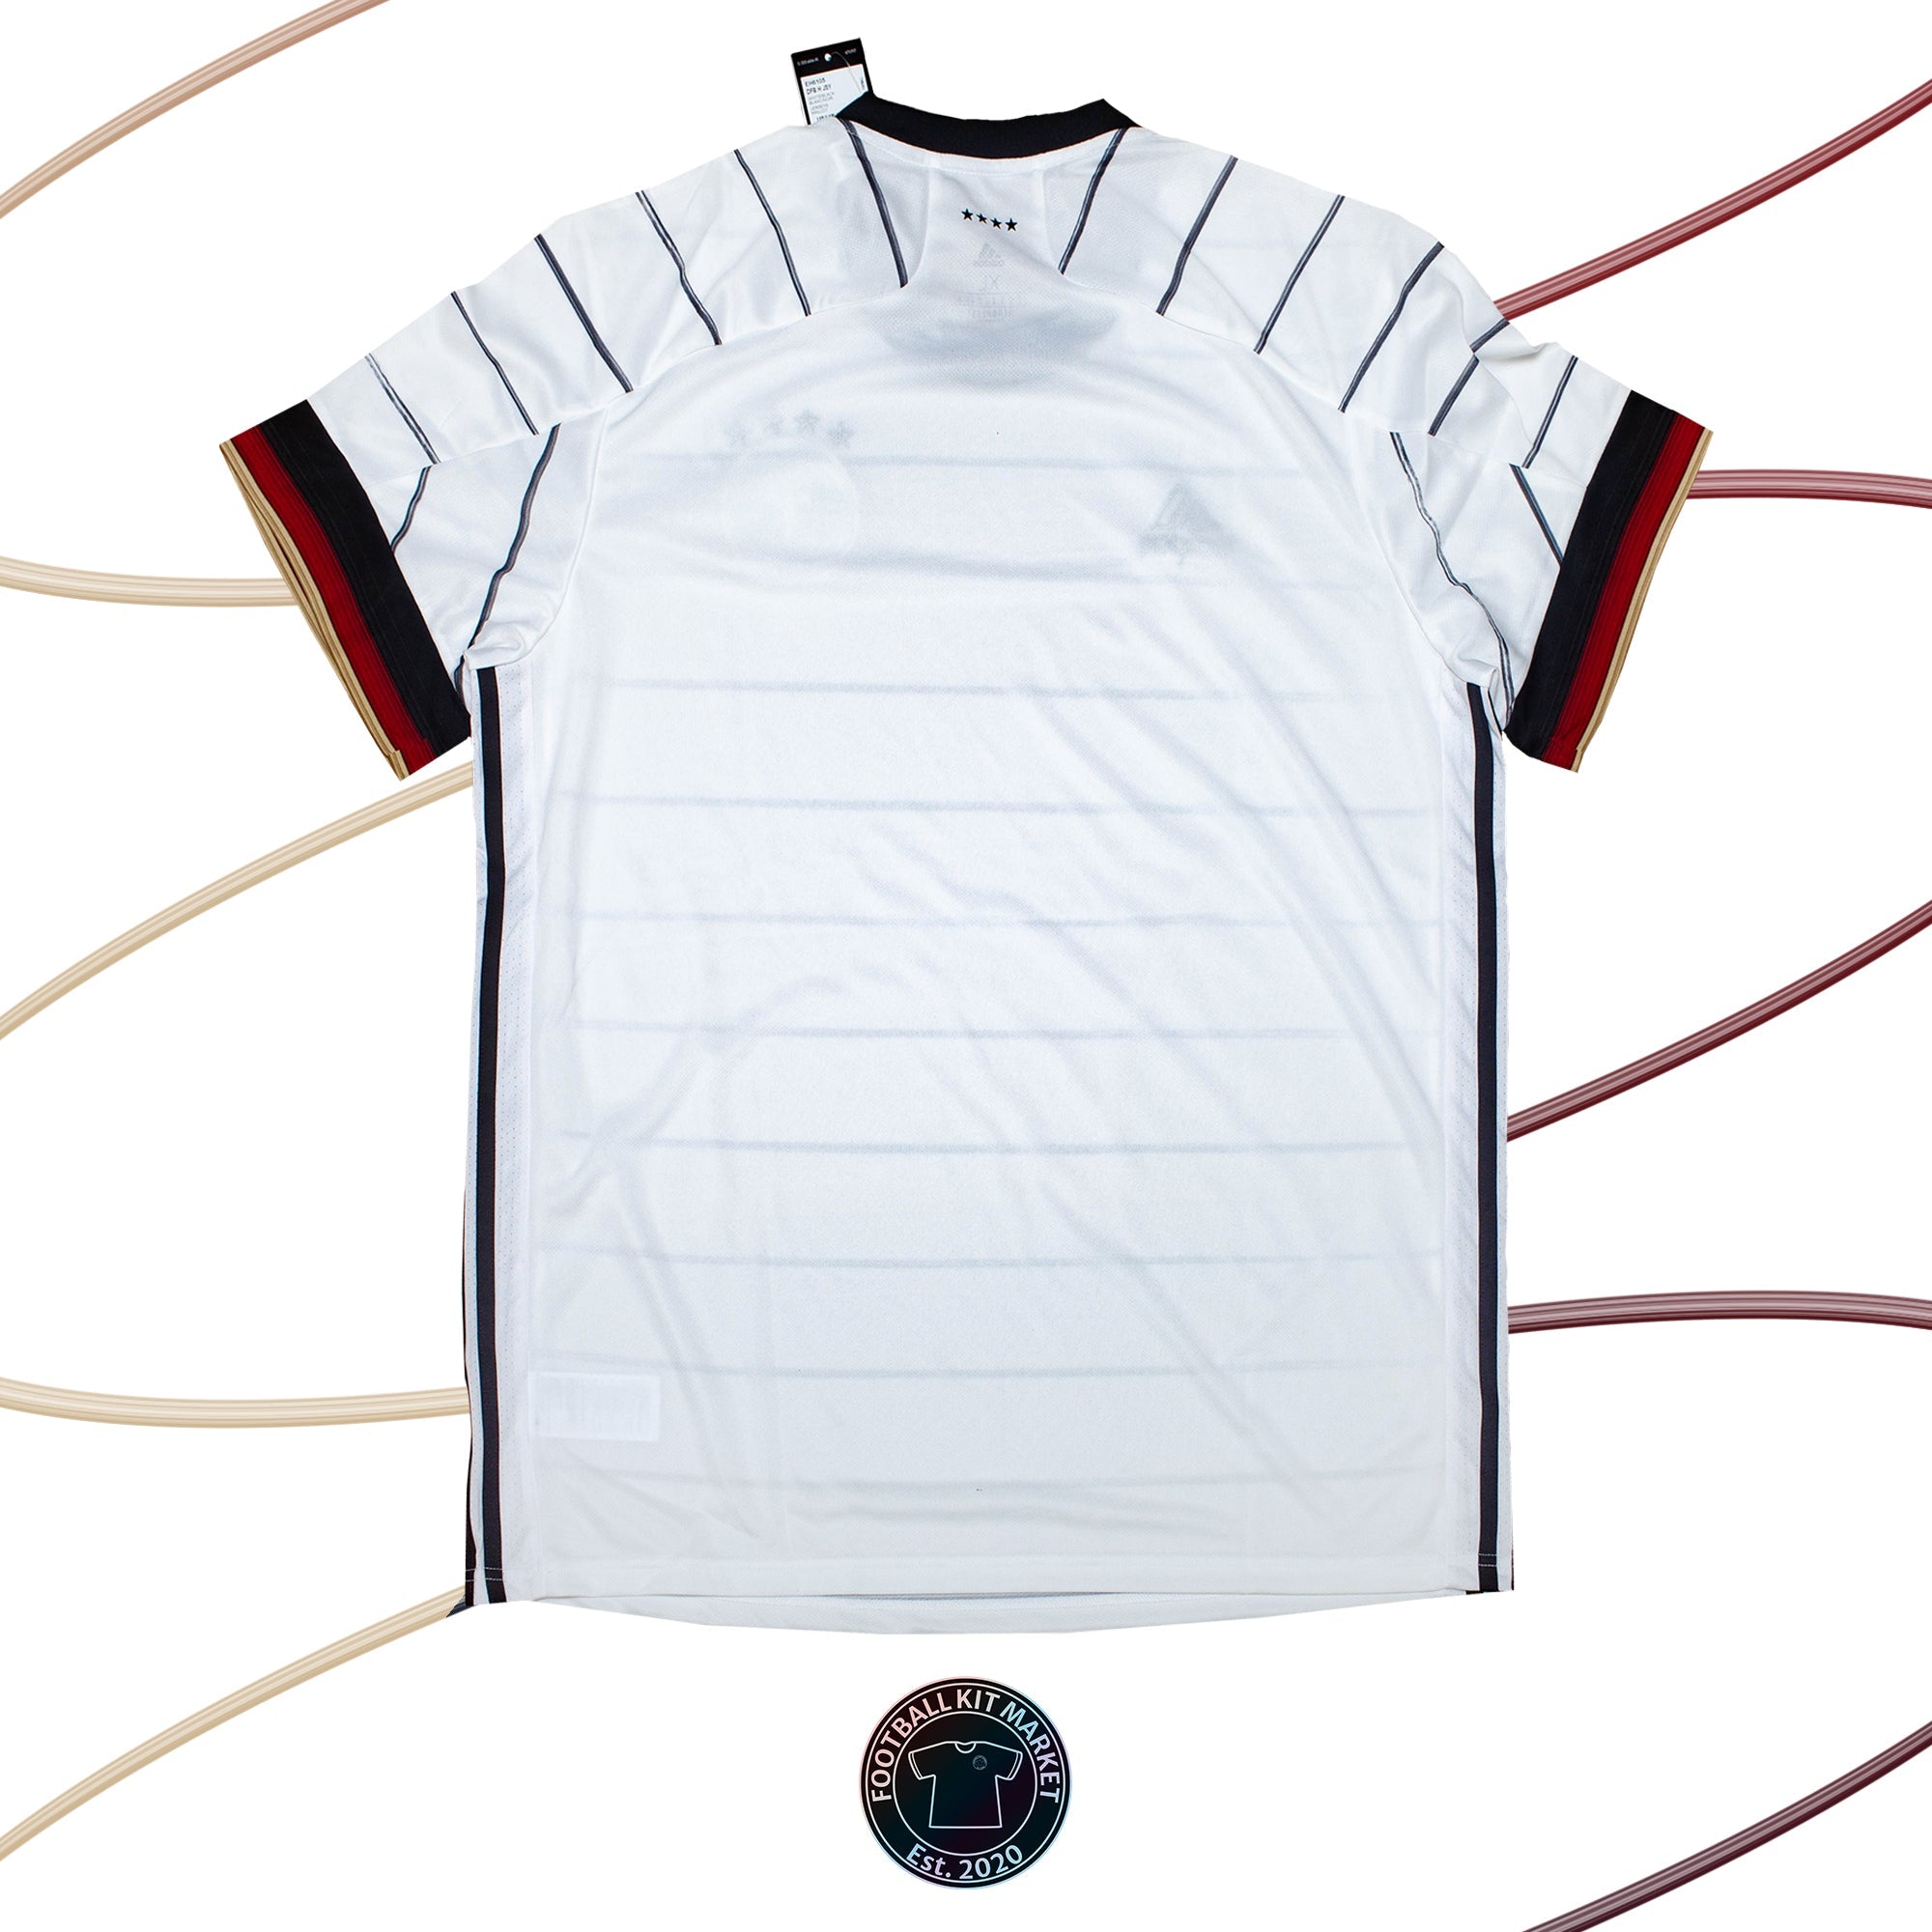 Genuine GERMANY Home (2020-2021) - ADIDAS (XL) - Product Image from Football Kit Market